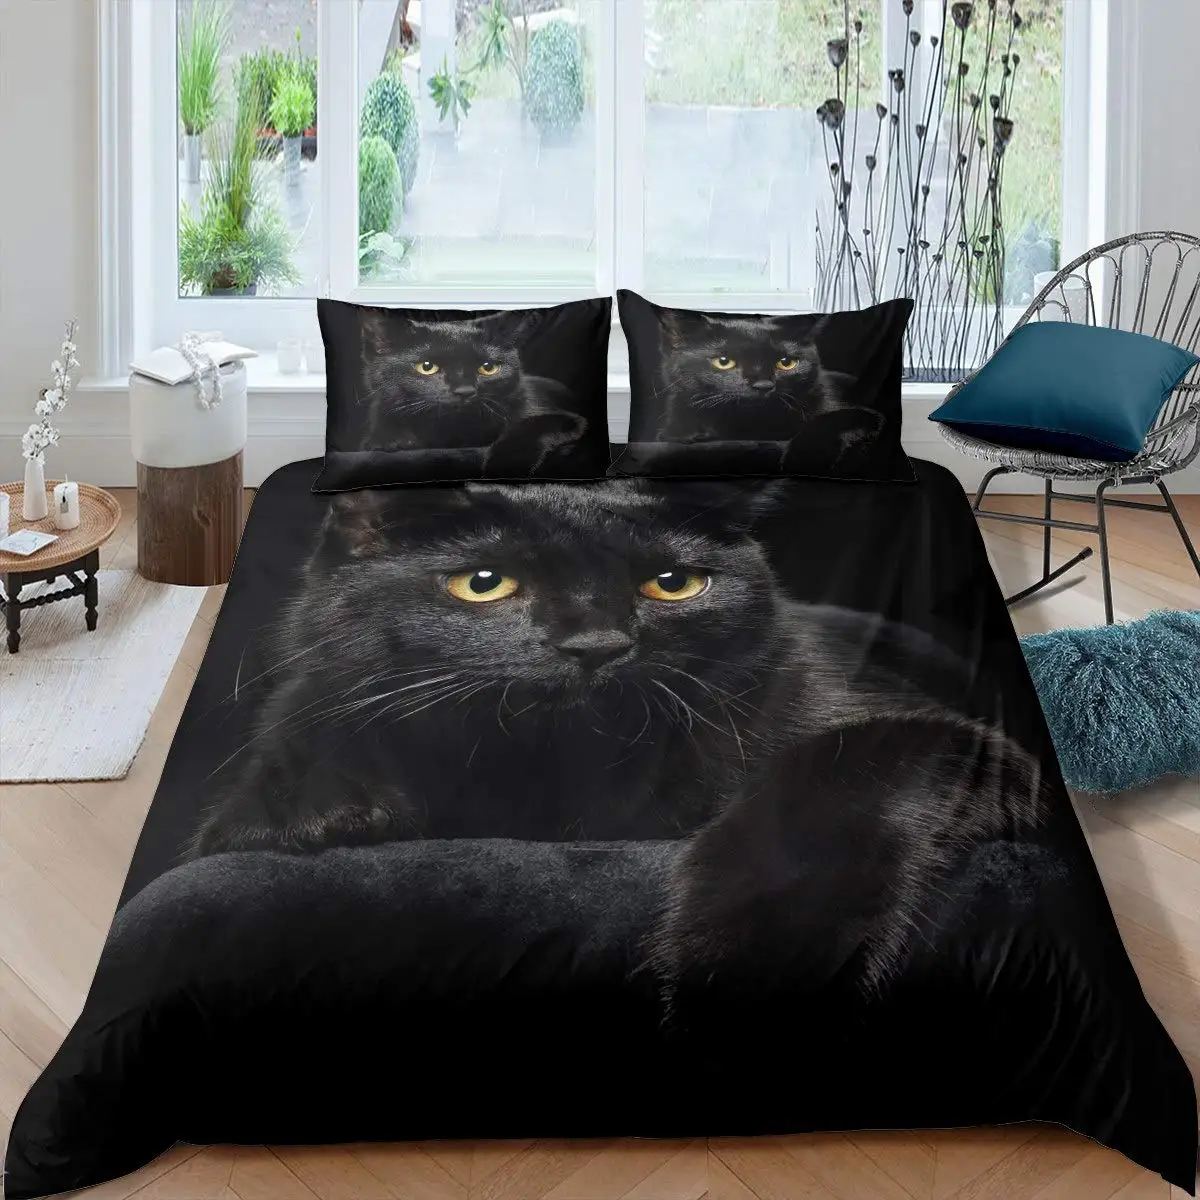 

Cat Duvet Cover Set Pet Cats Pattern Twin Bedding Set Cute Kitten for Boys Polyester Mysterious Black Cat King Size Quilt Cover